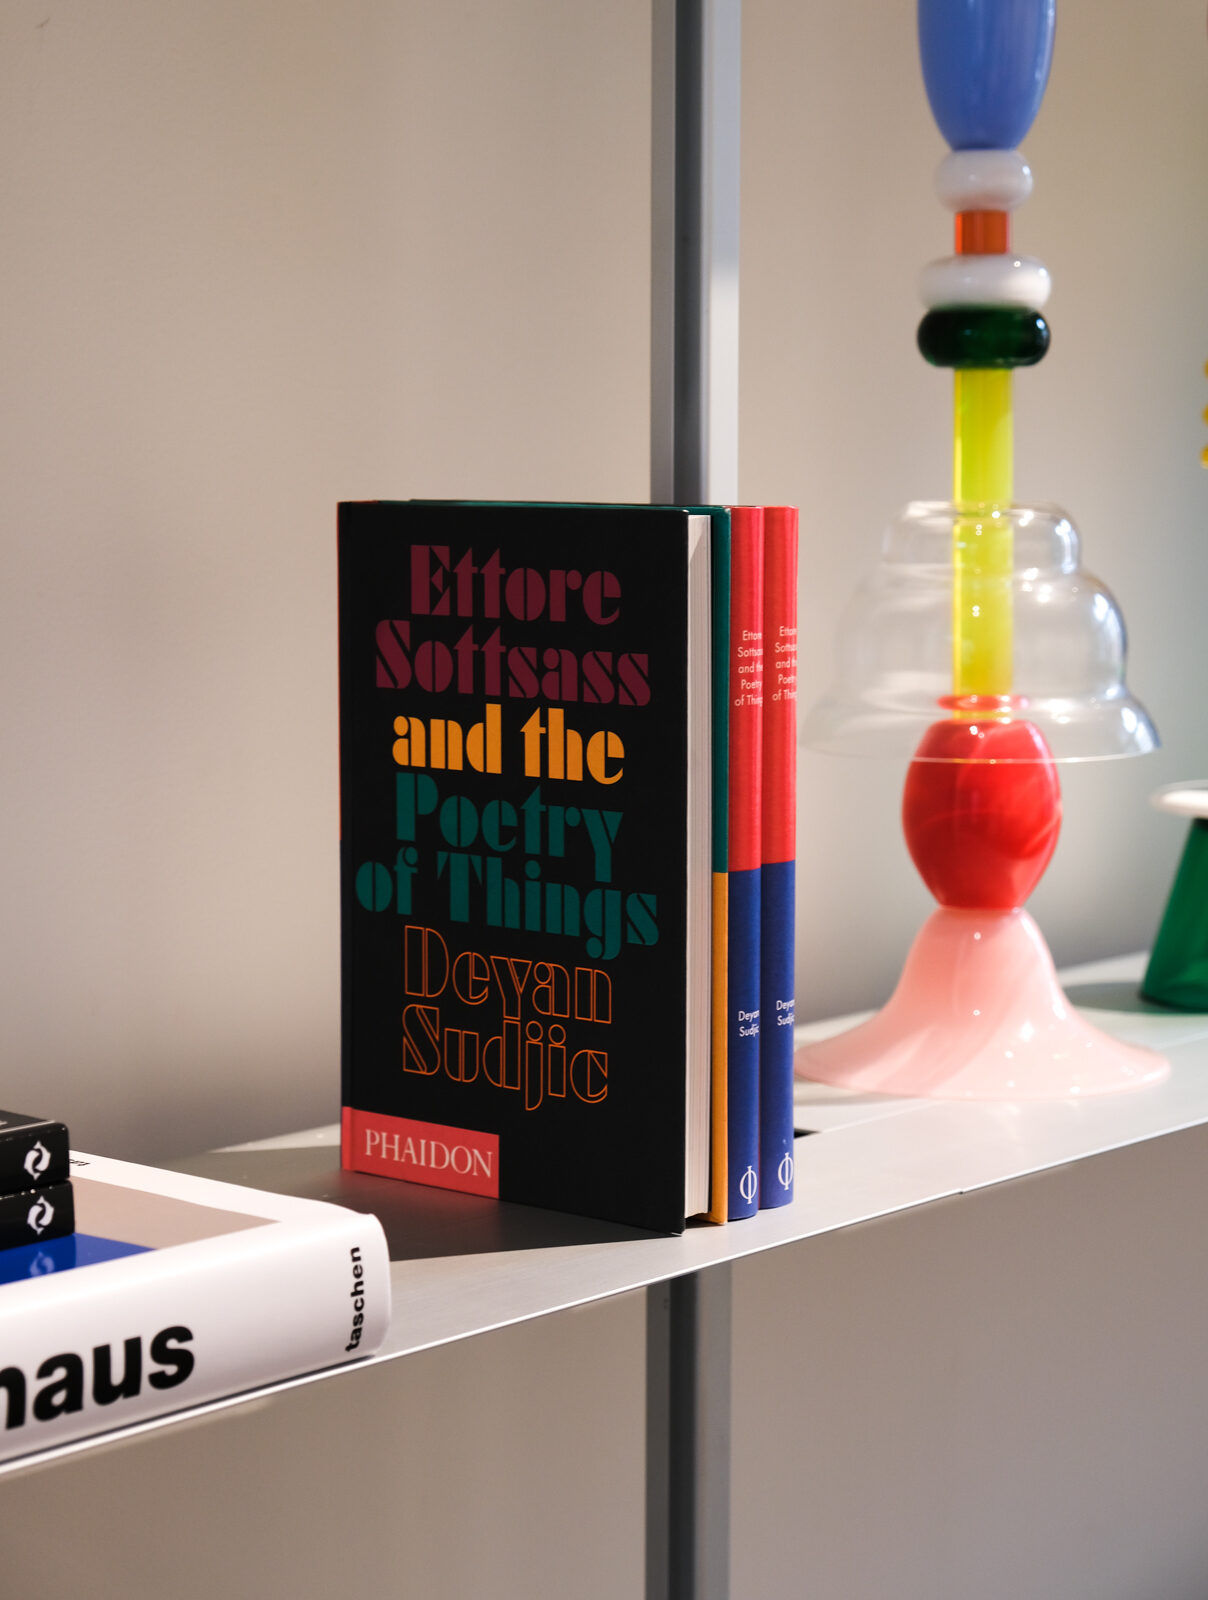 Ettore Sottsass and the Poetry of Things